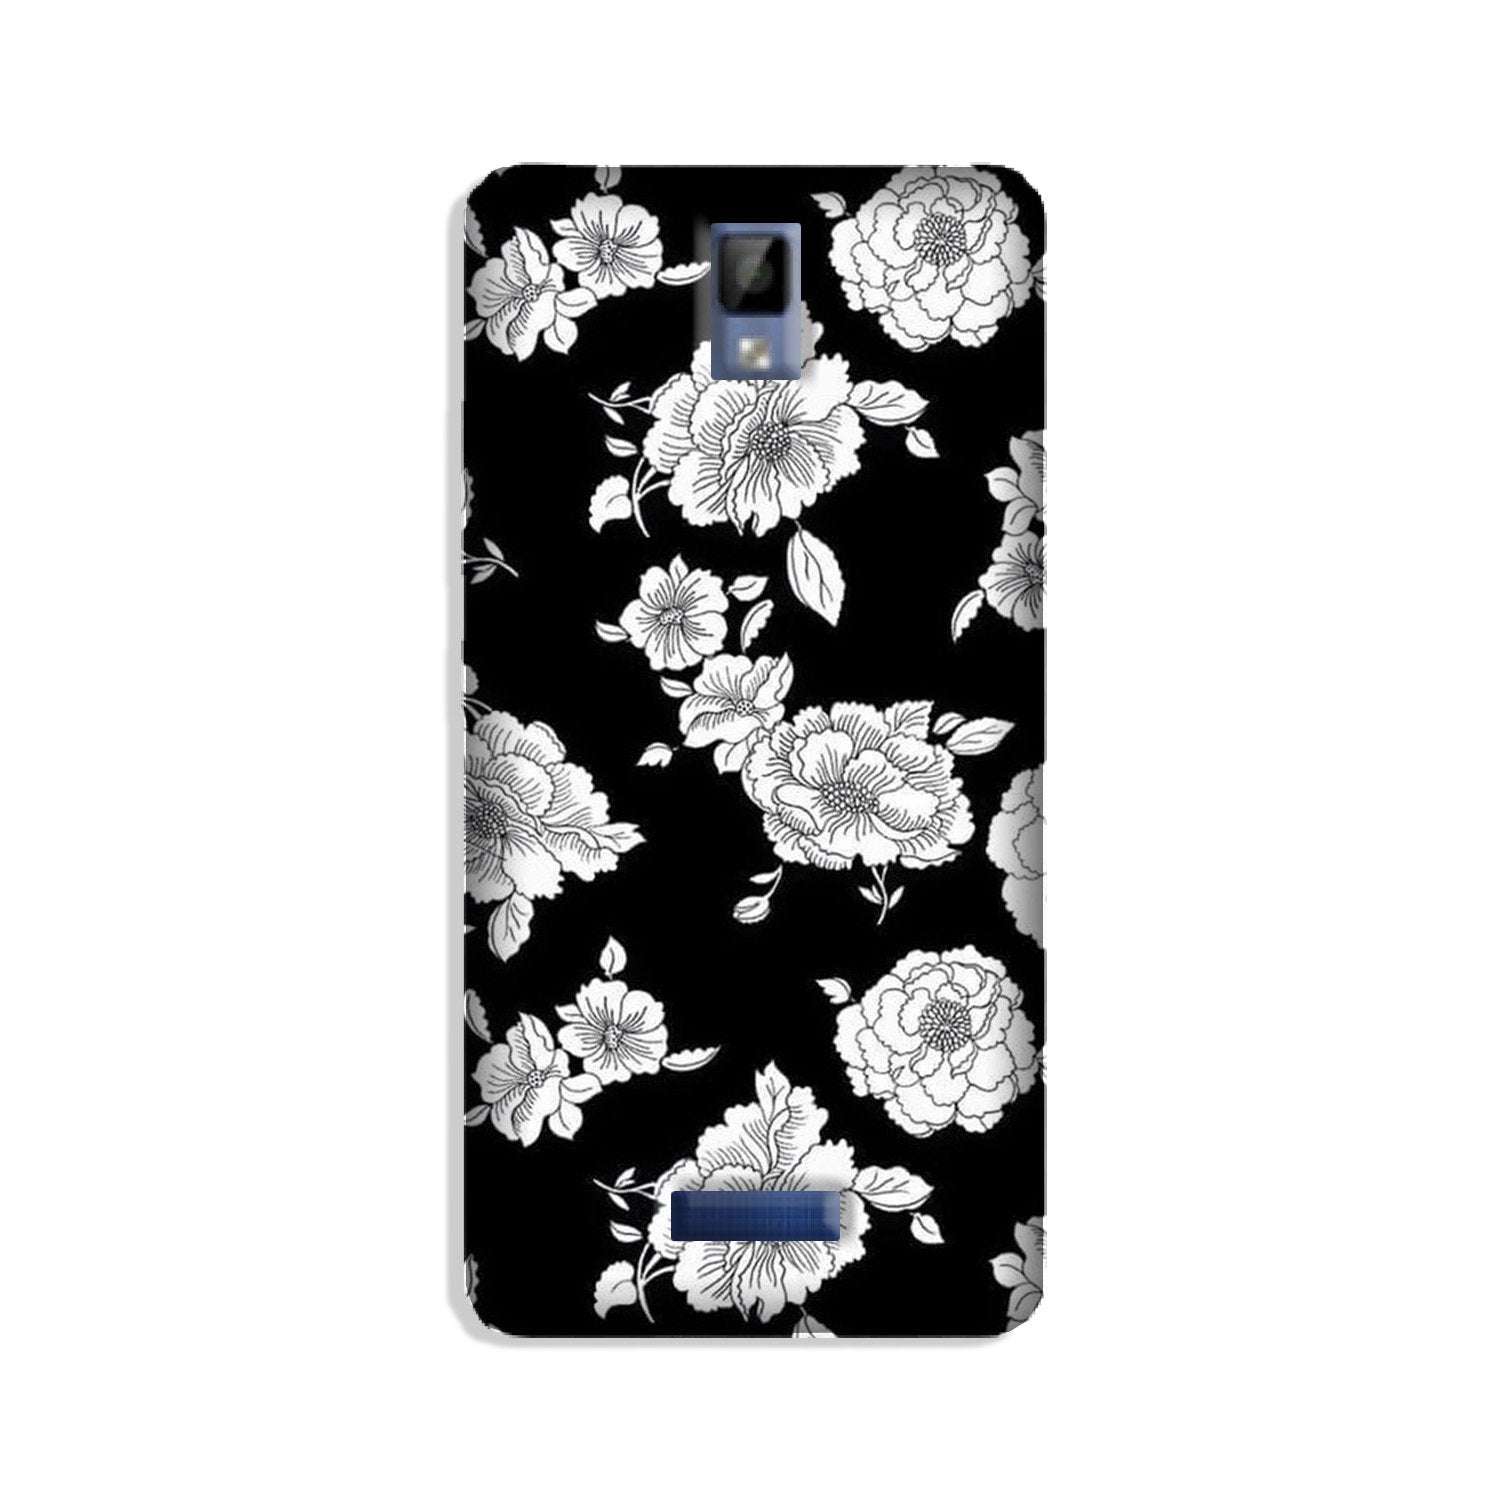 White flowers Black Background Case for Gionee P7